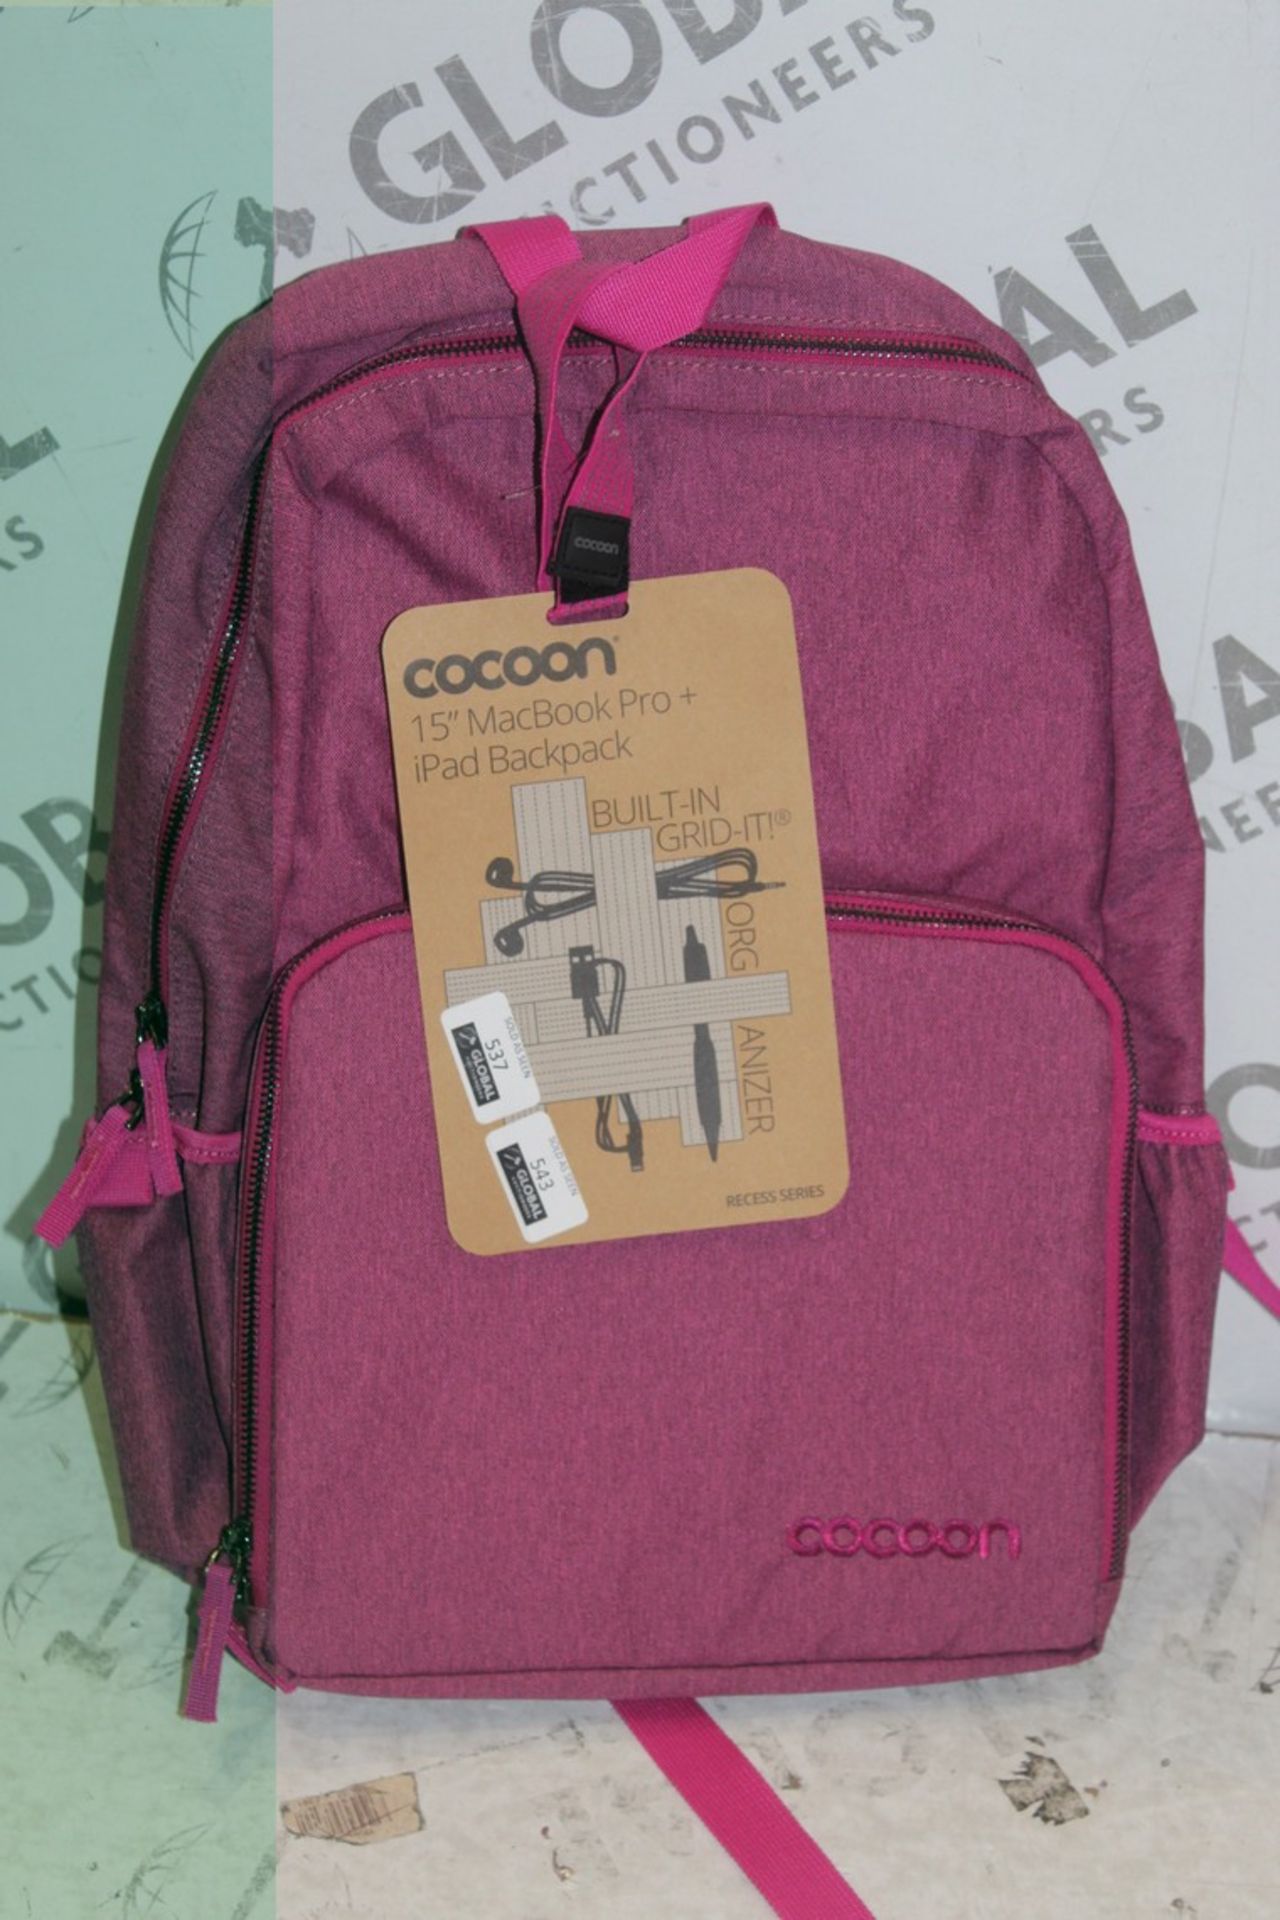 Cocoon 15" MacBook Pro Plus iPad Backpack With Build In Grid It Organiser RRP £70 (Pictures Are